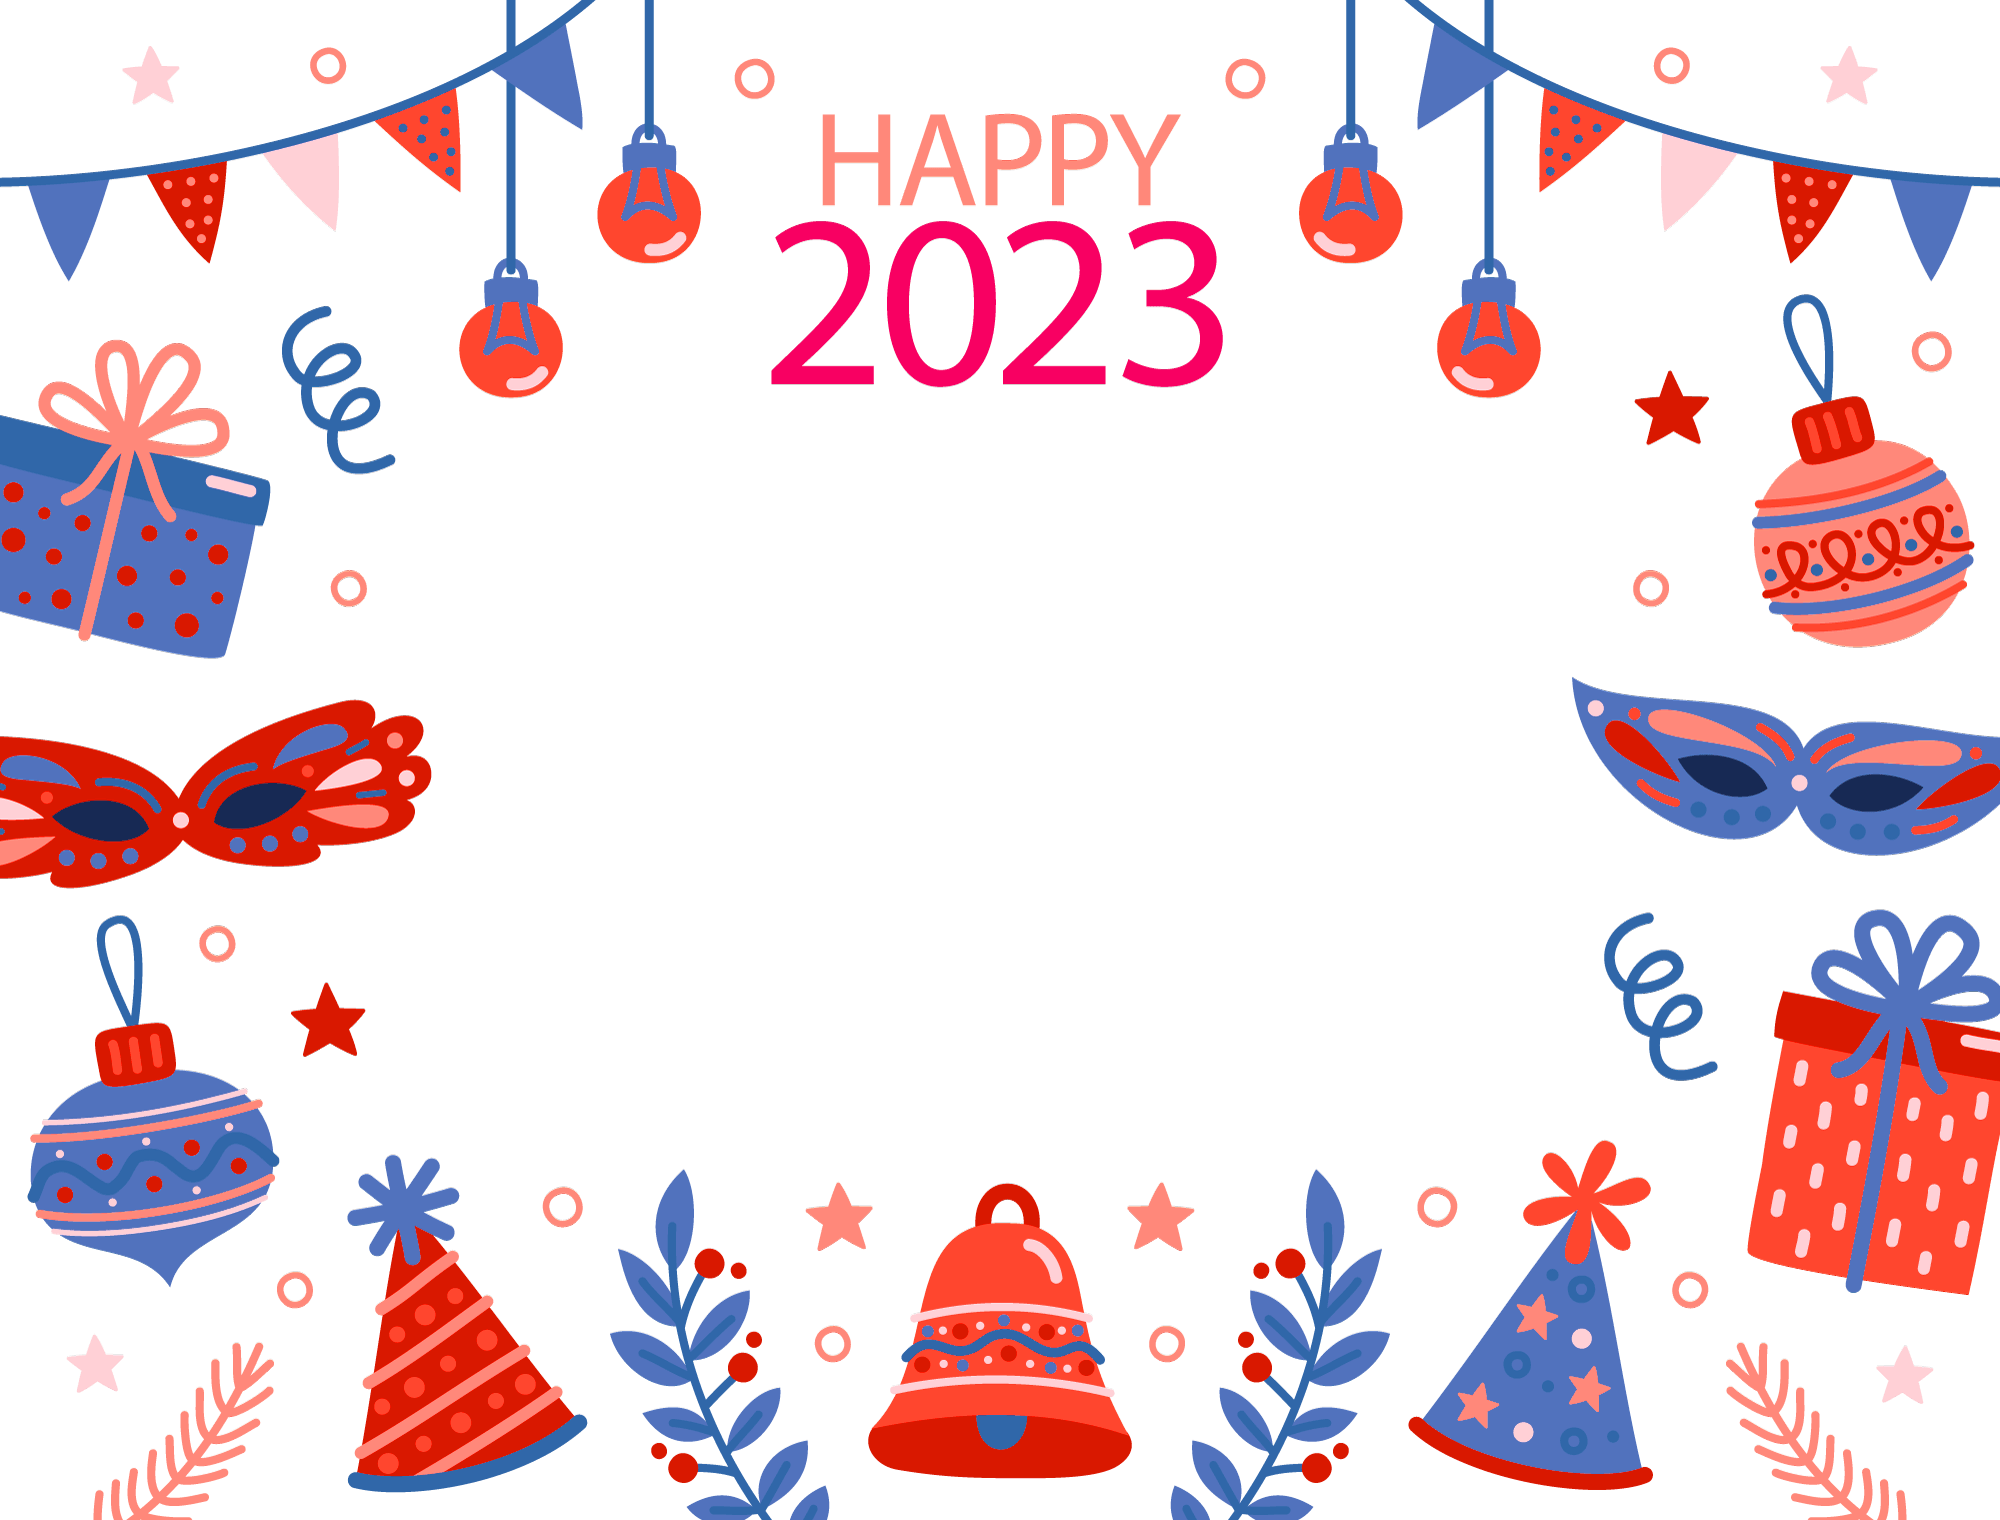 Happy new year 2023 decorative png background design